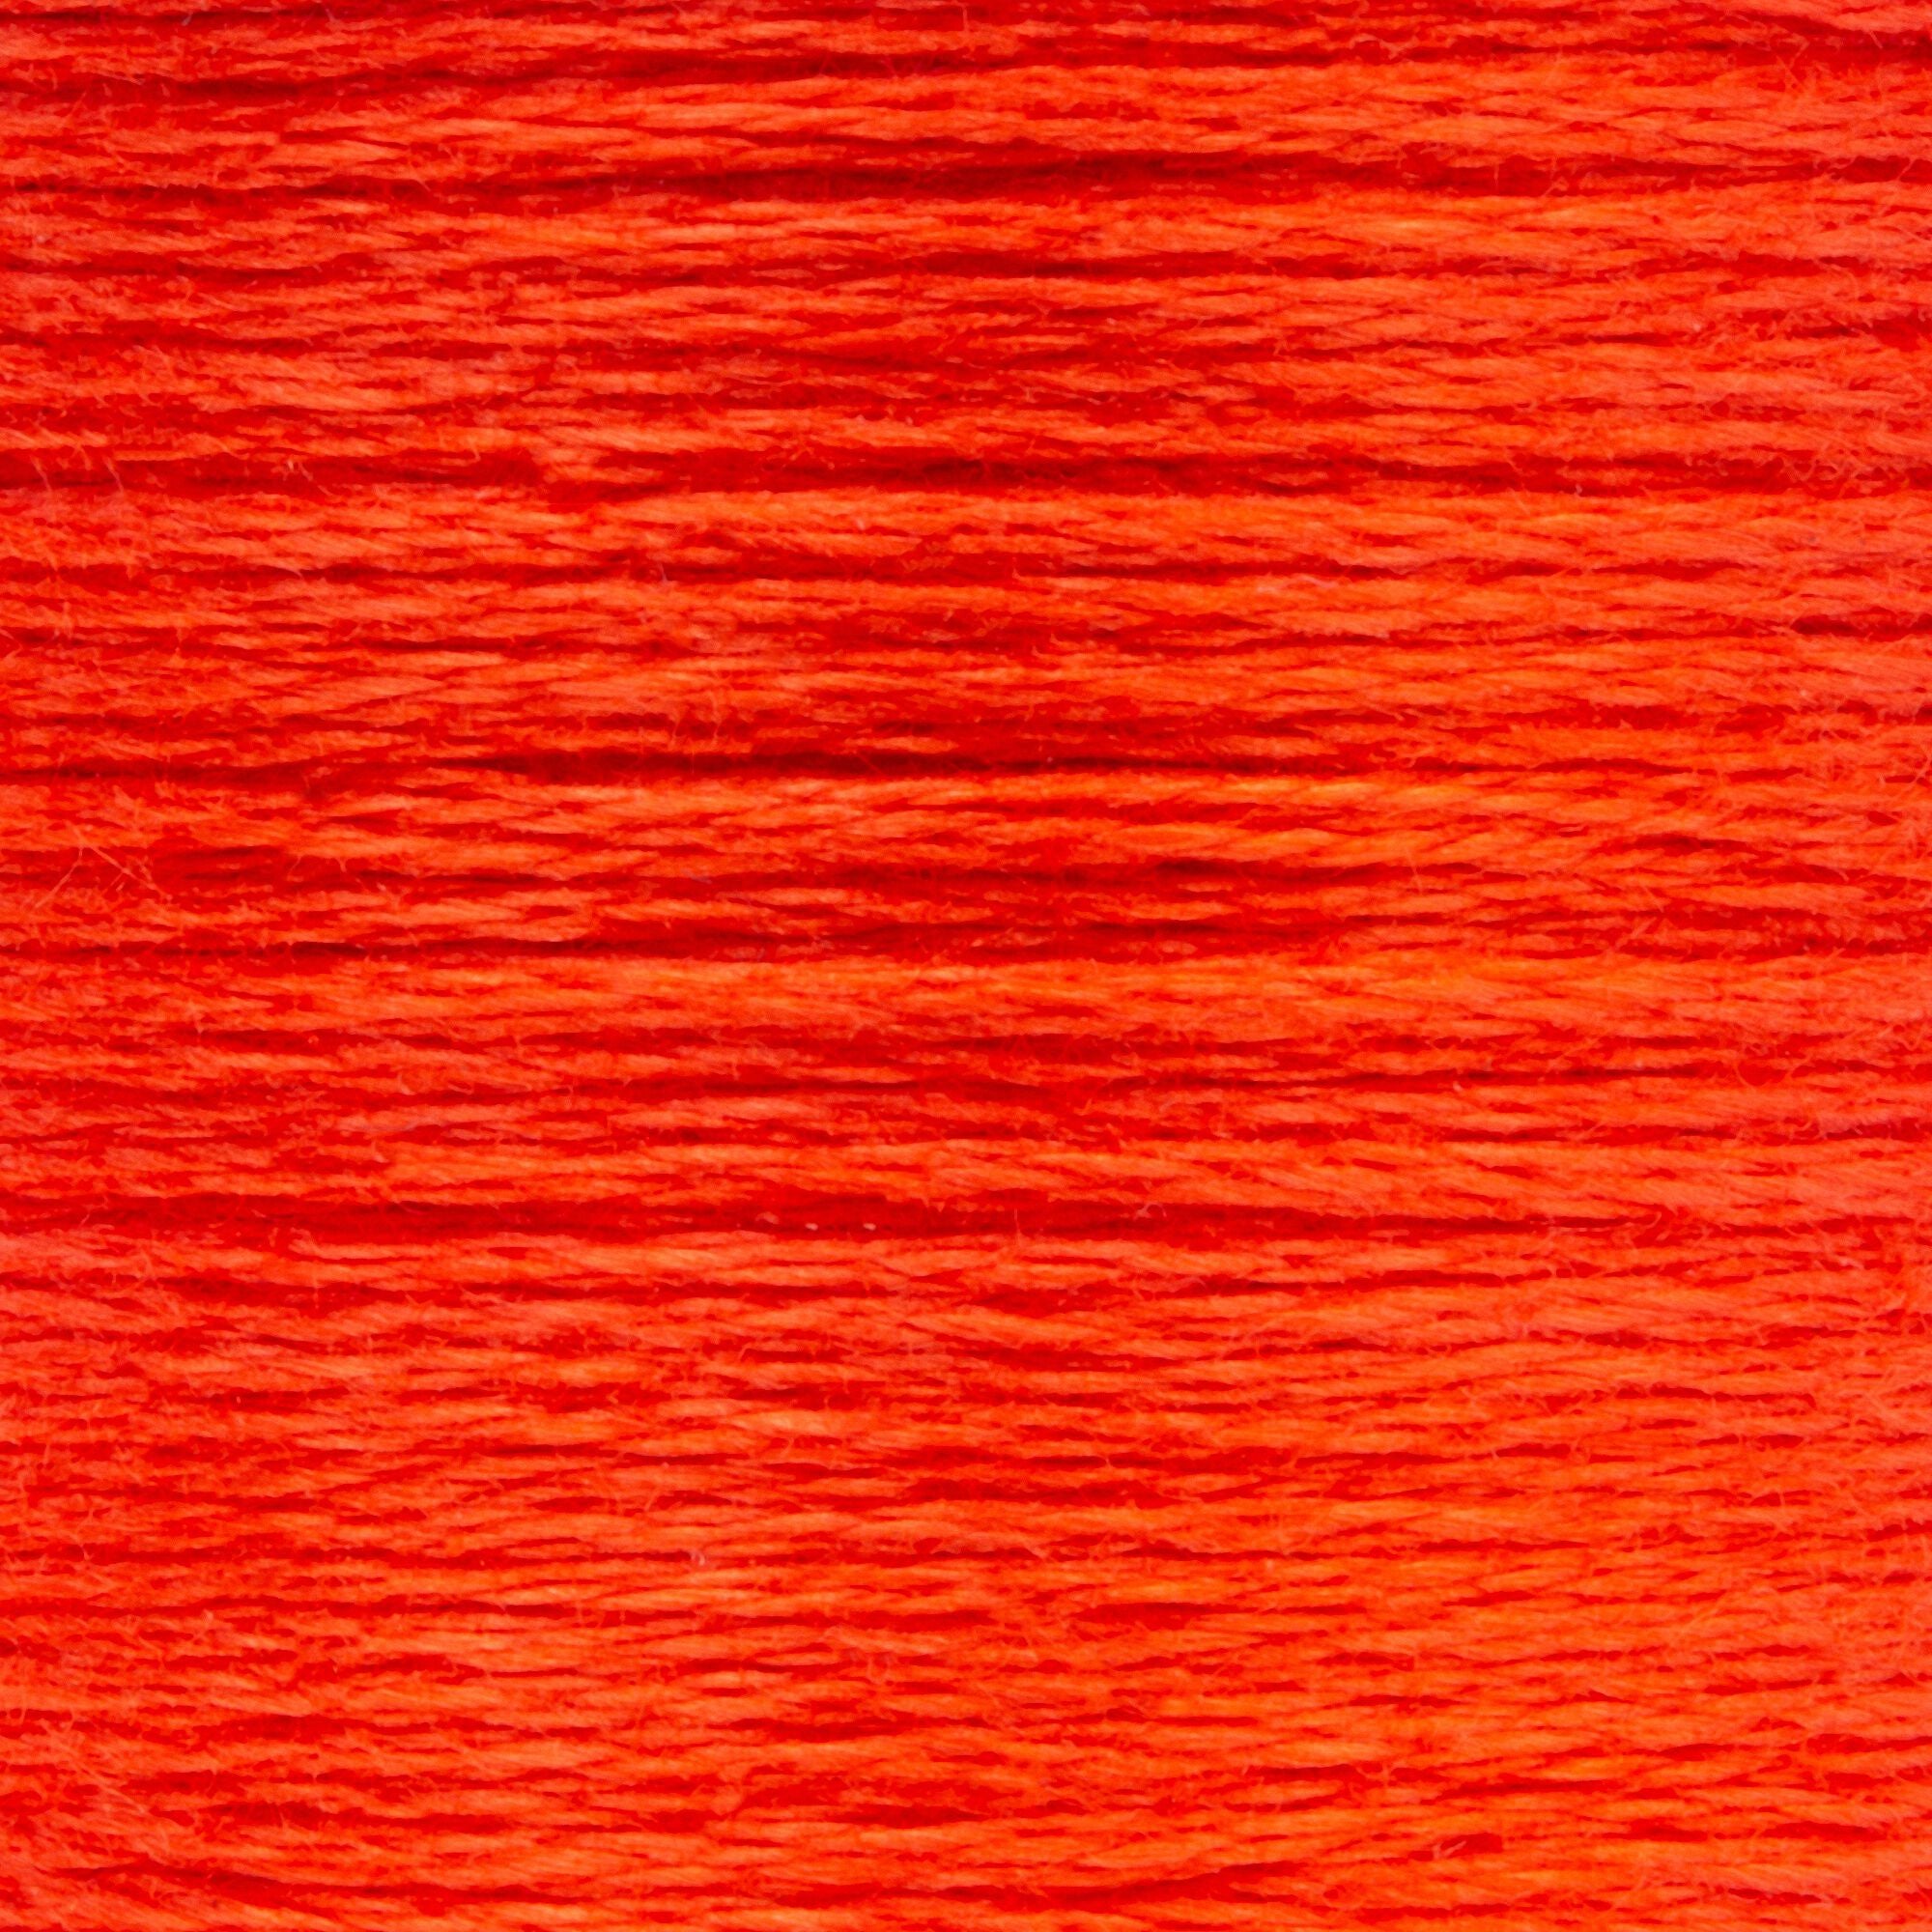 Anchor Embroidery Floss in Blaze Med Lt